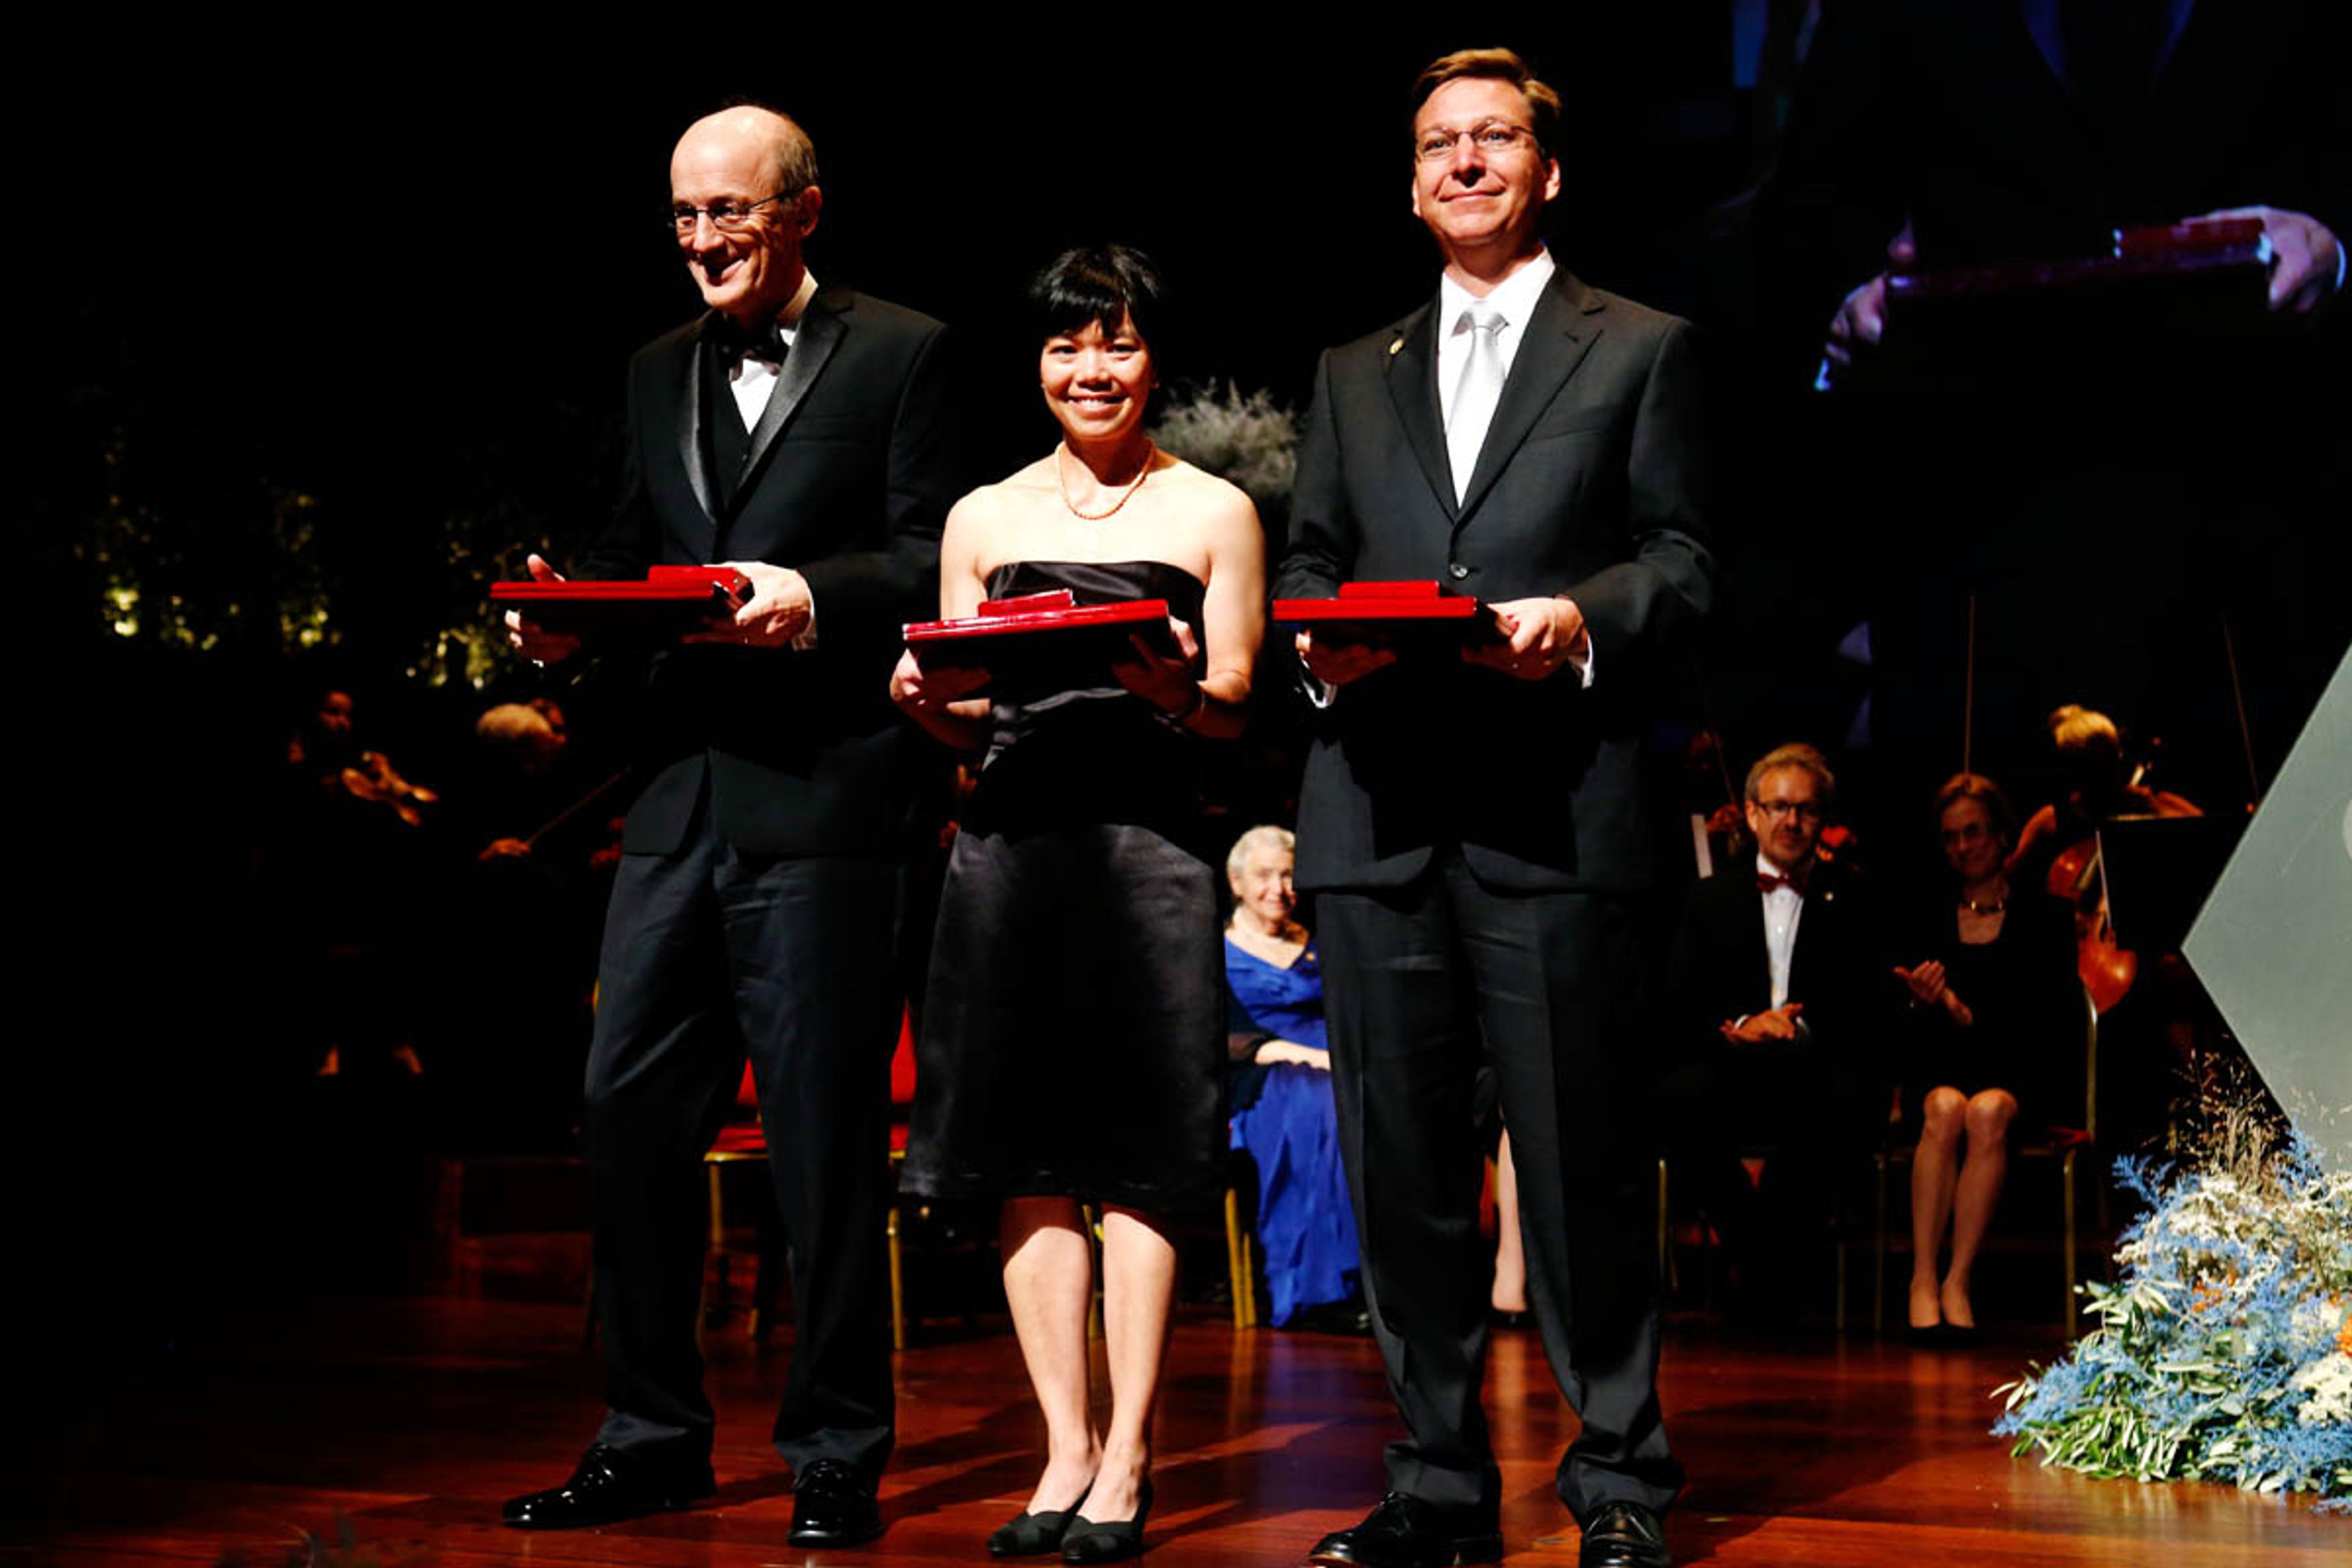 2012 Kavli Prize Astrophysics laureates at the ceremony in Oslo, from left: David C. Jewitt, Jane X. Luu and Michael Edwards Brown